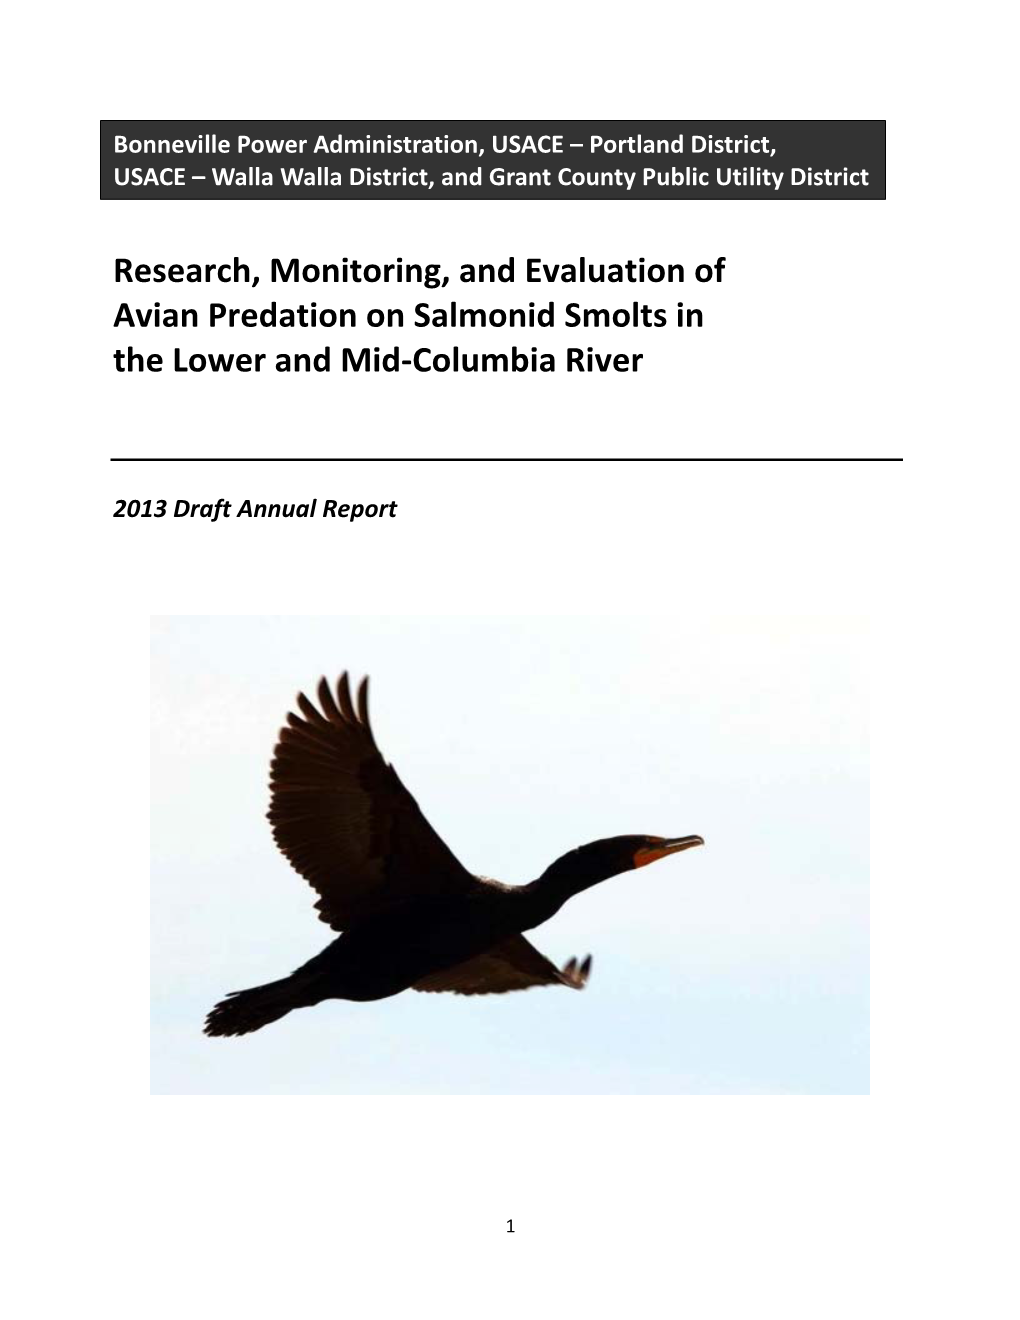 Research, Monitoring, and Evaluation of Avian Predation on Salmonid Smolts in the Lower and Mid‐Columbia River